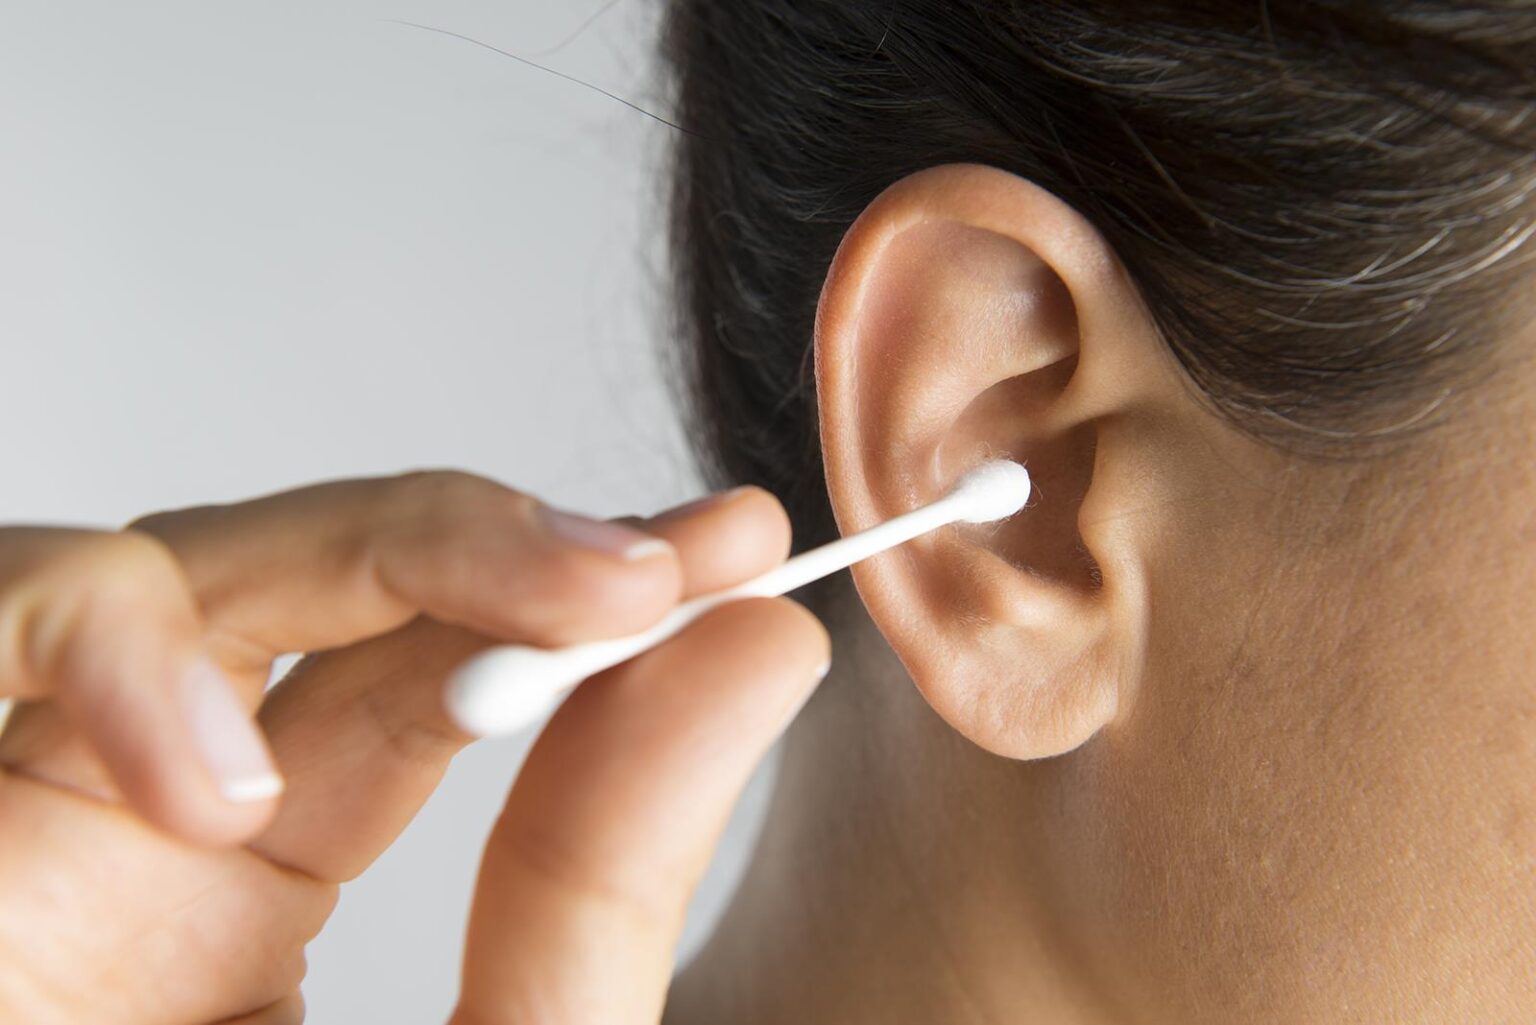 Do you suffer from ear pain? Or, do your ears feel plugged? All the ways doctors can perform ear wax removal today.